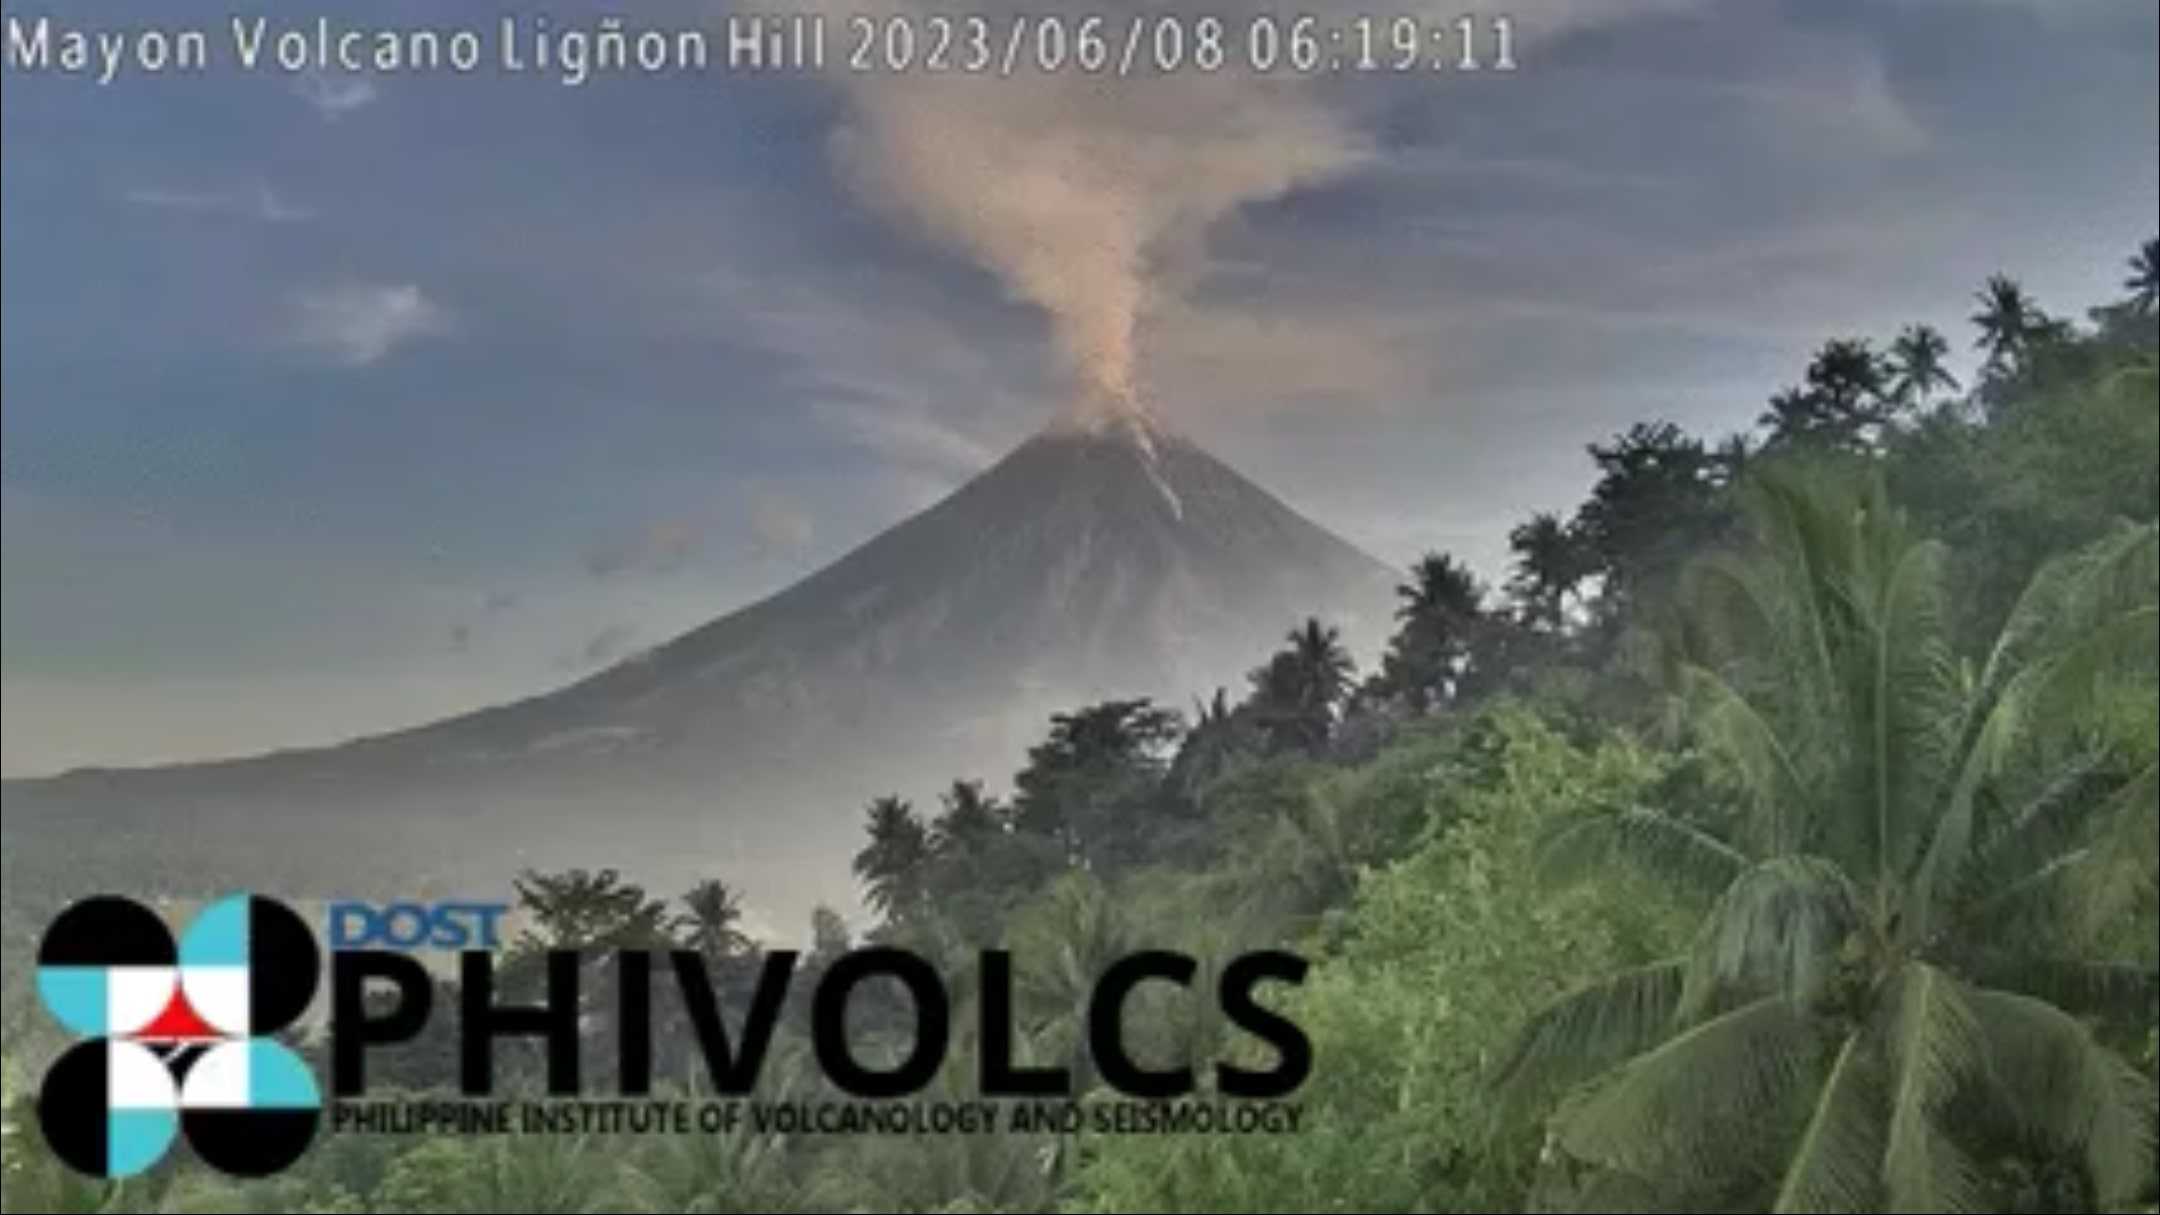 No volcanic earthquake but rockfall events, lava flow continues in Mayon